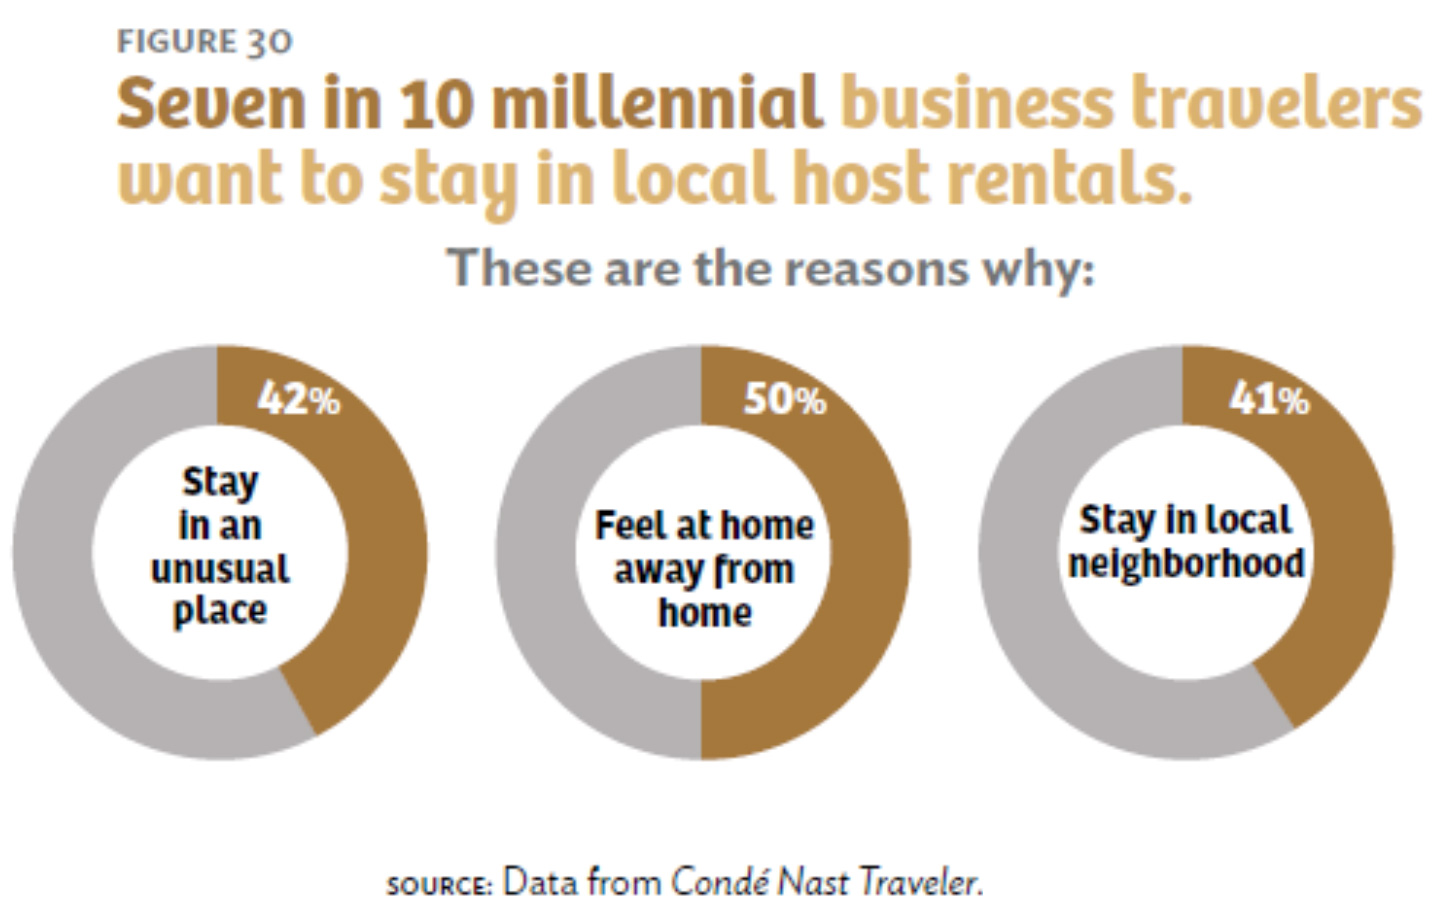 Seven in 10 millennial business travelers want to stay in local host rentals.